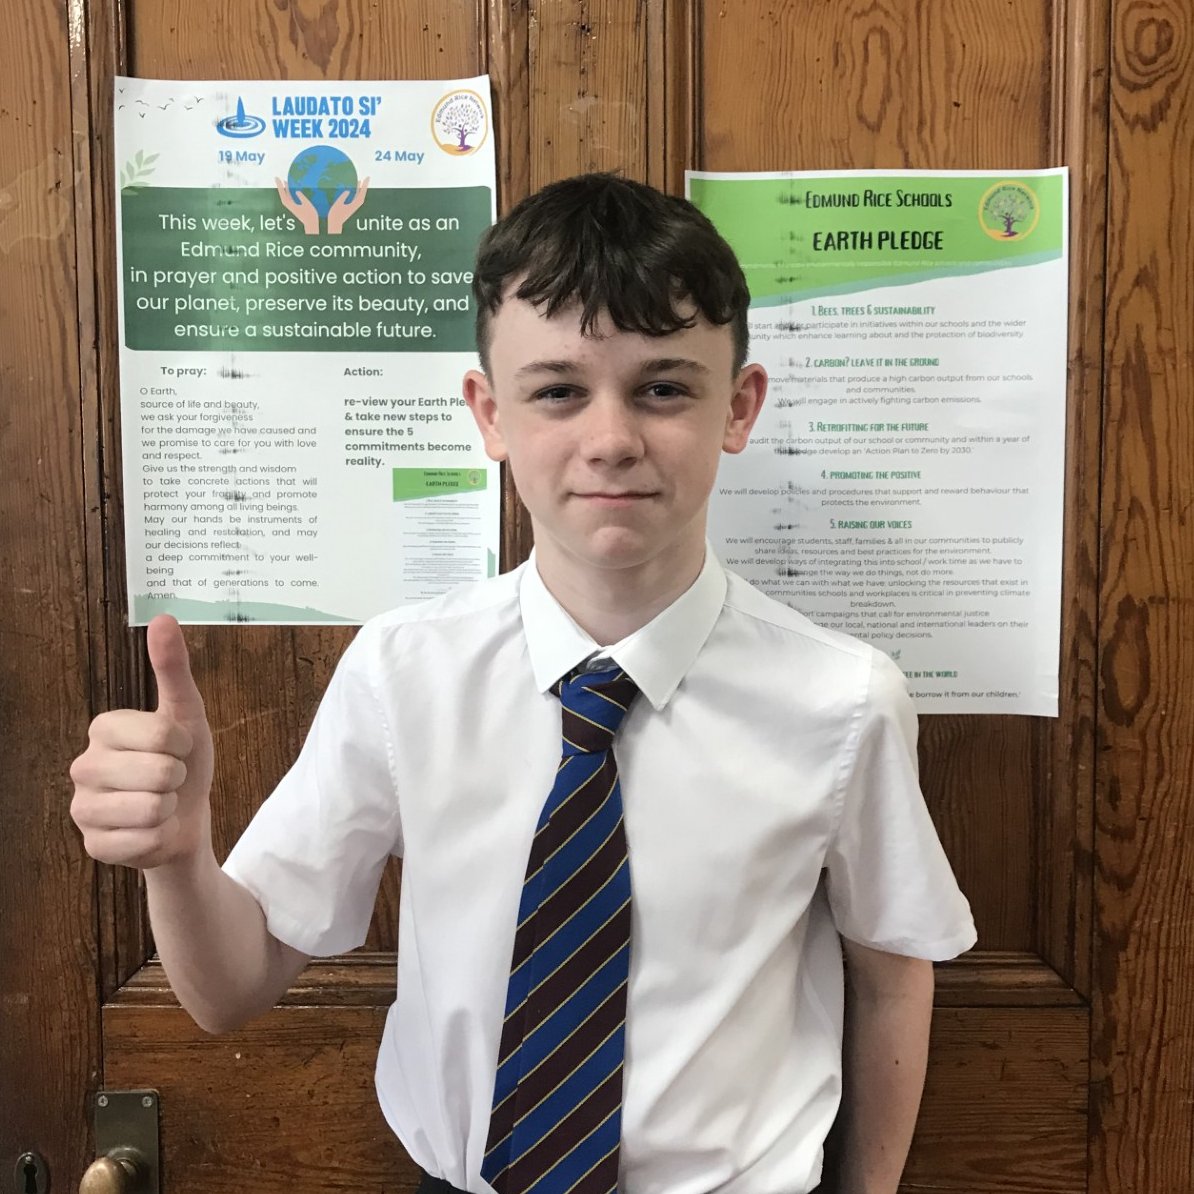 As part of our RE campaign and to support the #LaudatoSiweek of the @edmundrice_eng Network. Cormac Q in 8T focused his project on Stewardship and Care for the Common Good by spending his Saturday litter-picking on Crosby Beach and answering questions to passers-by! 🏖️👏